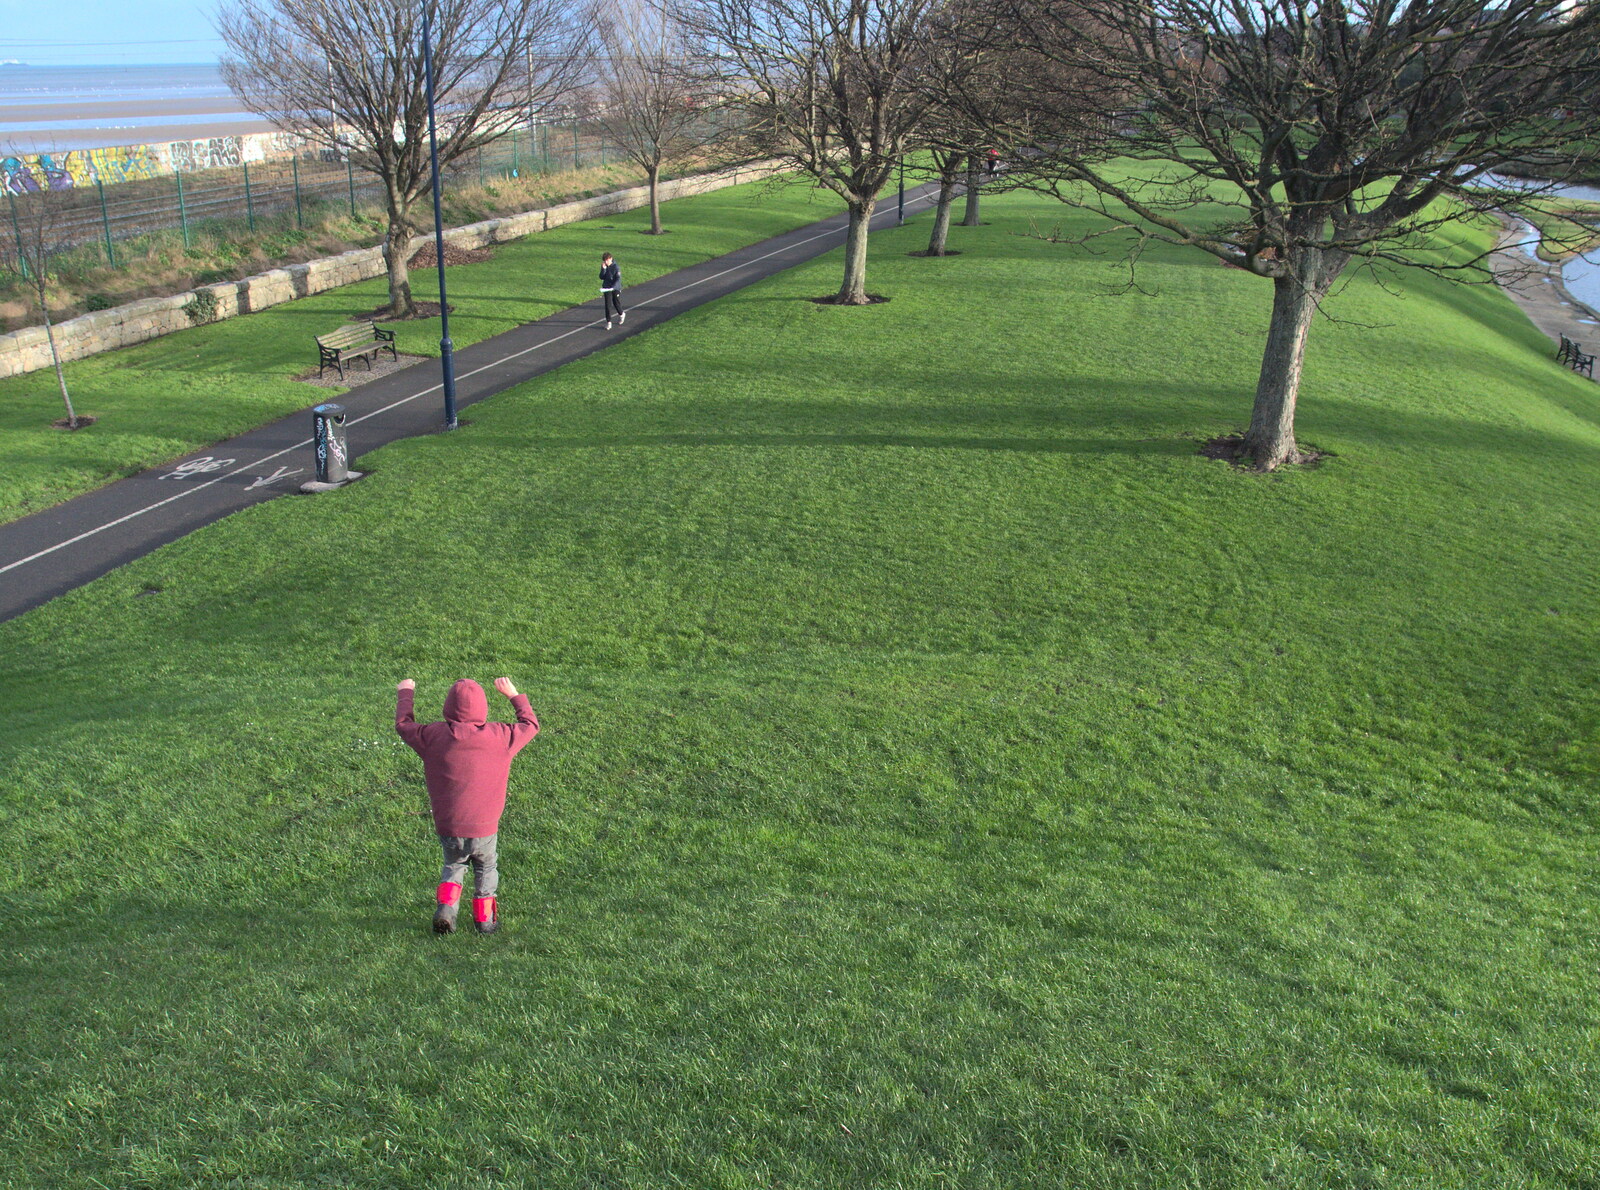 Fred runs around in Blackrock Park from Christmas Eve in Dublin and Blackrock, Ireland - 24th December 2015